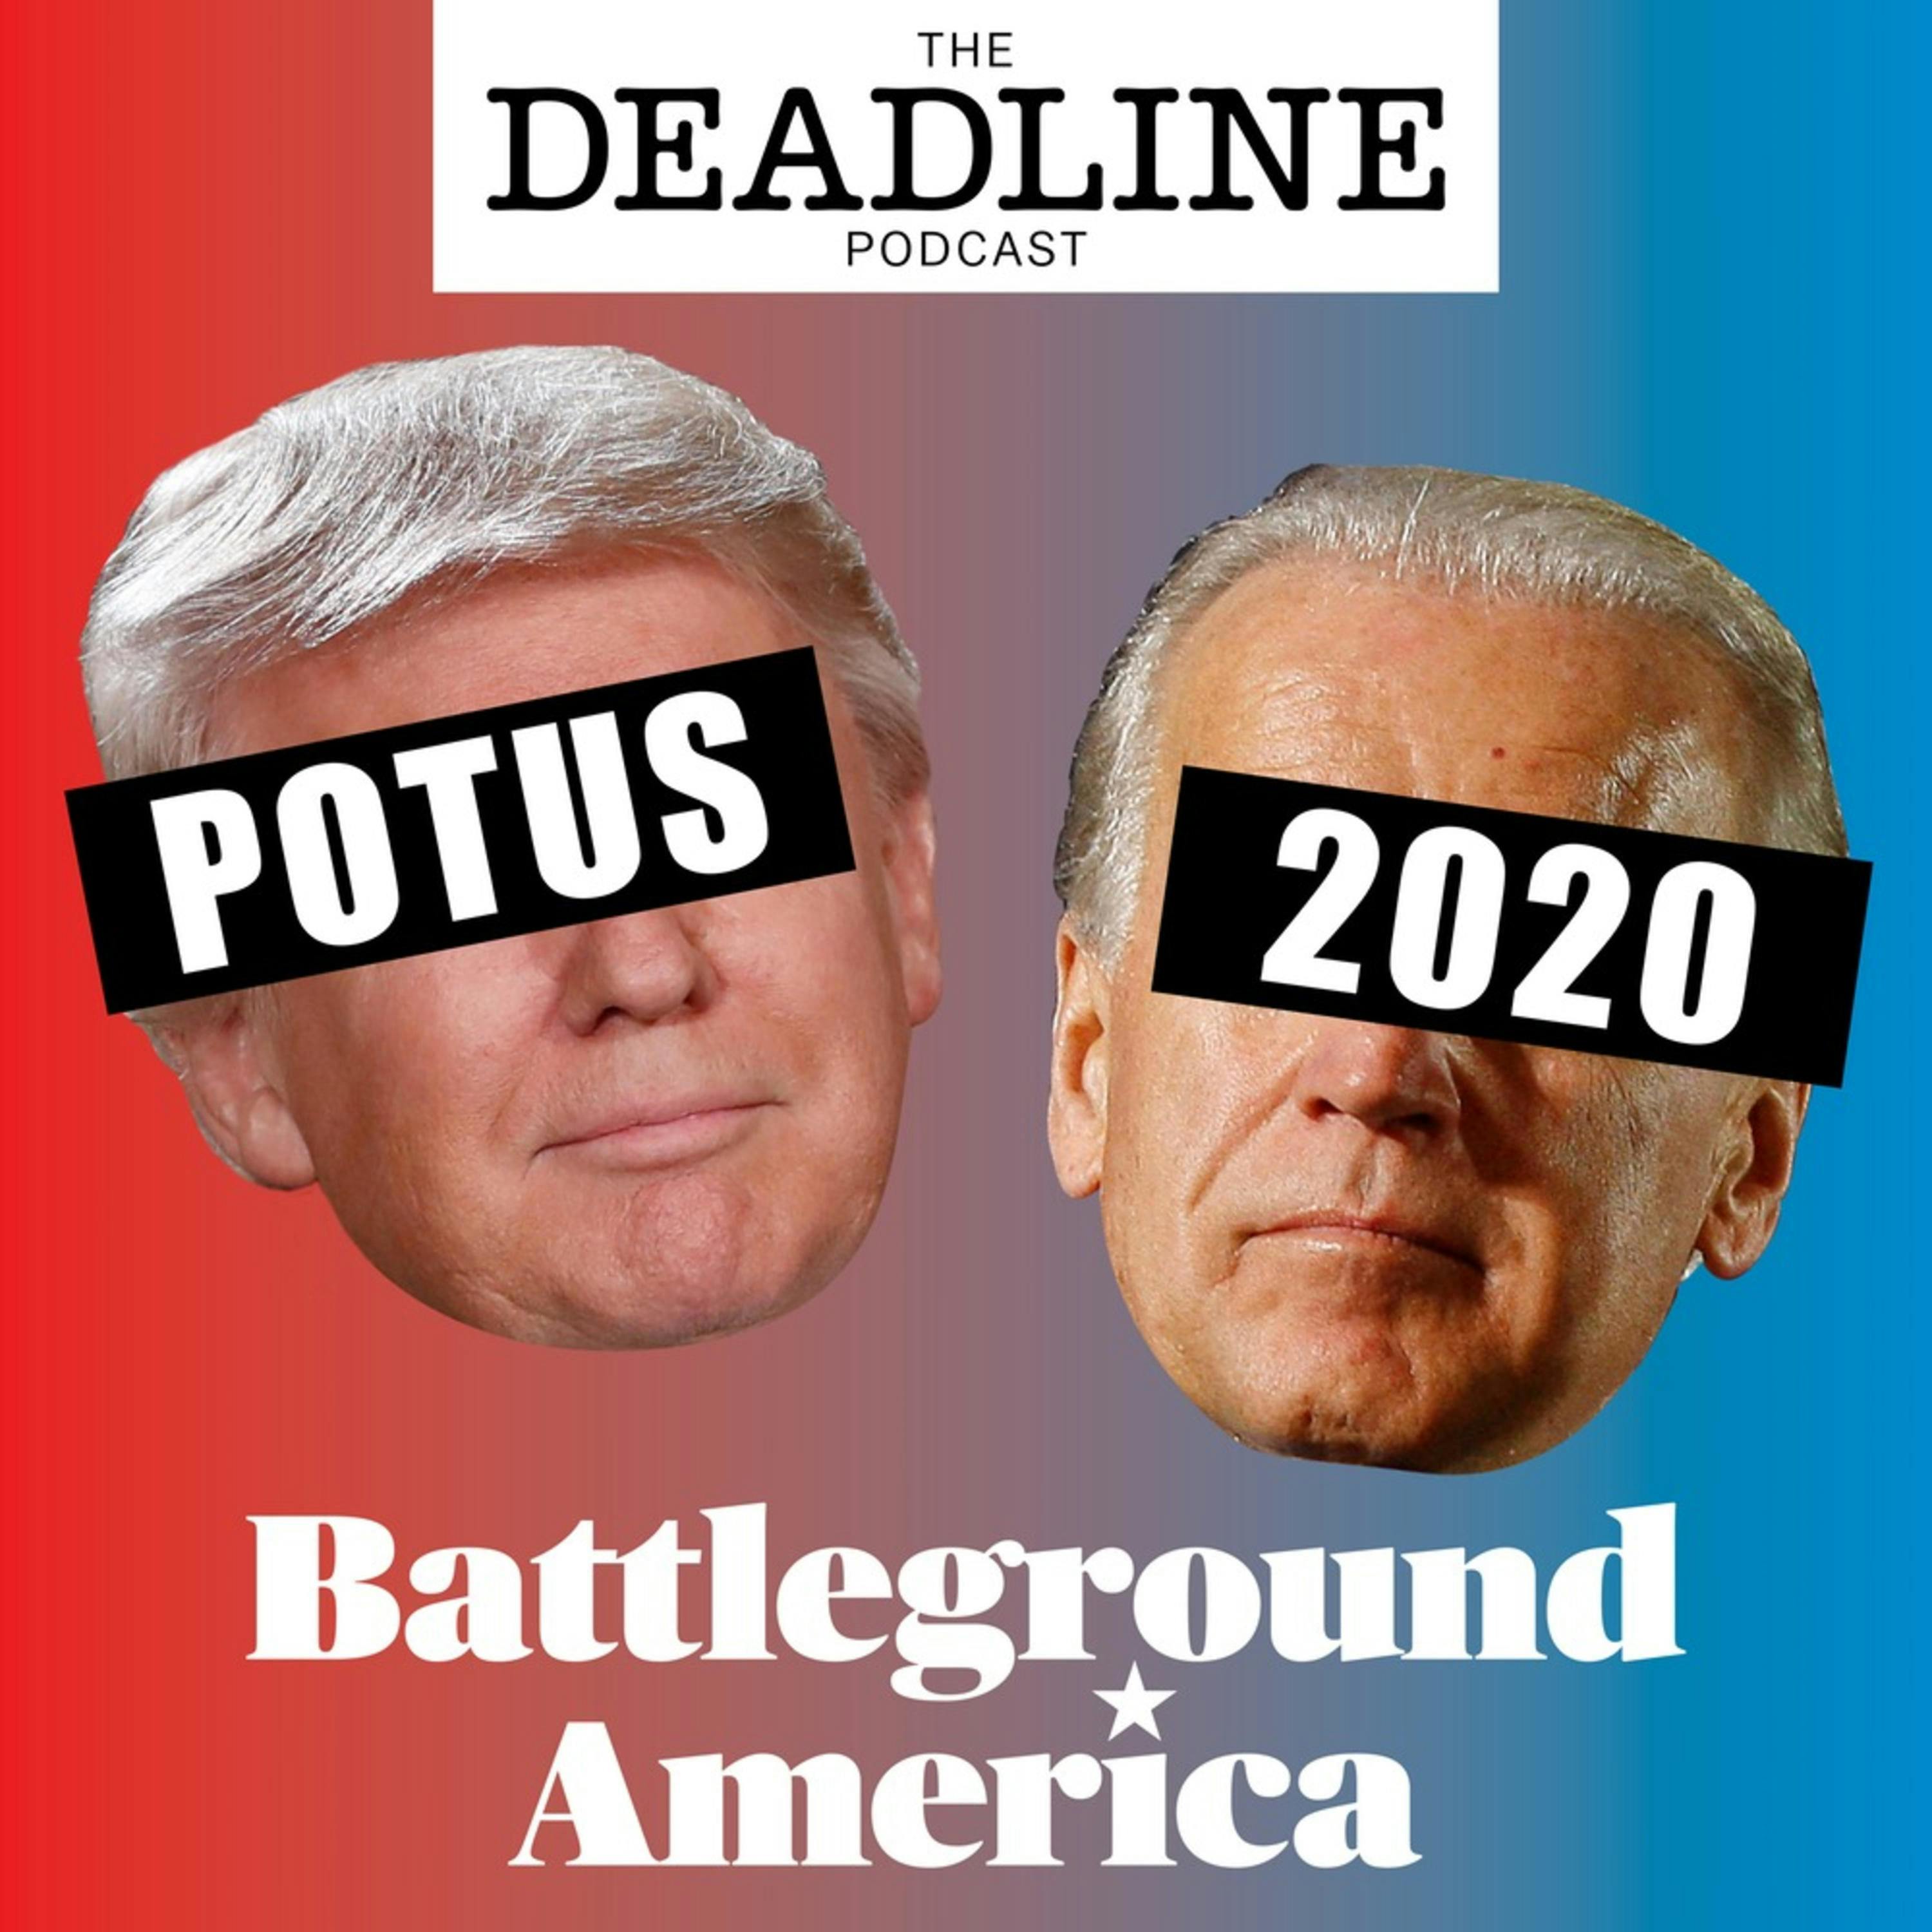 POTUS 2020: Battleground America brought to you by Deadline